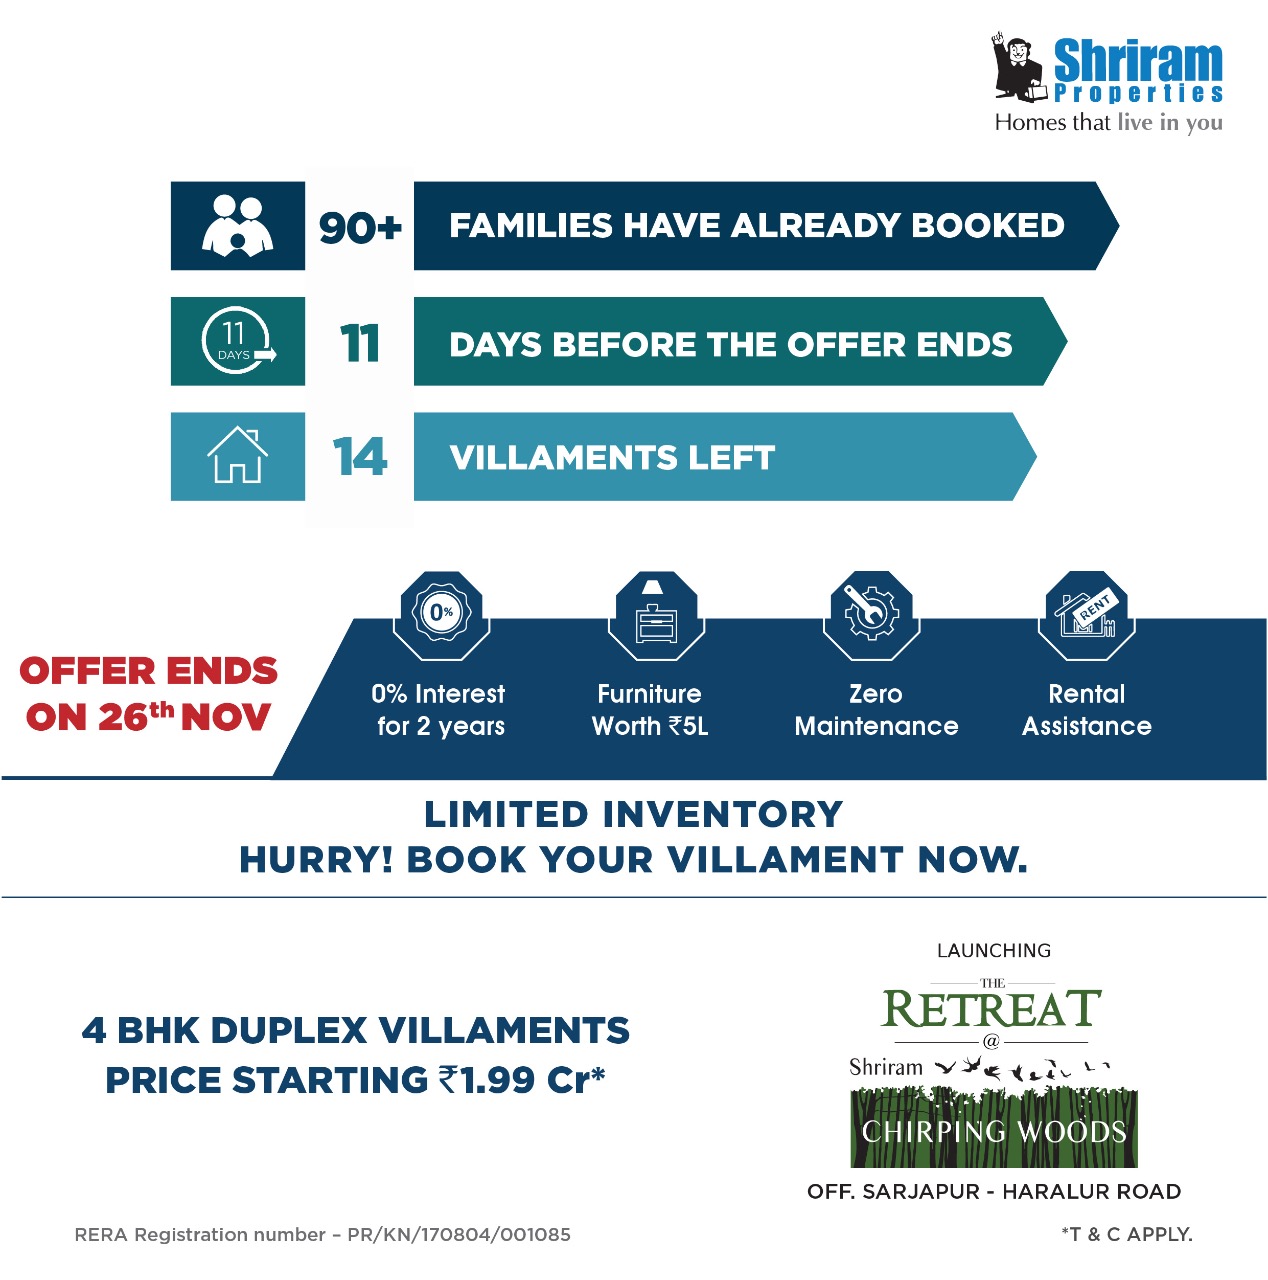 Book your villaments now before the offer ends at Shriram Chirping Woods in Bangalore Update